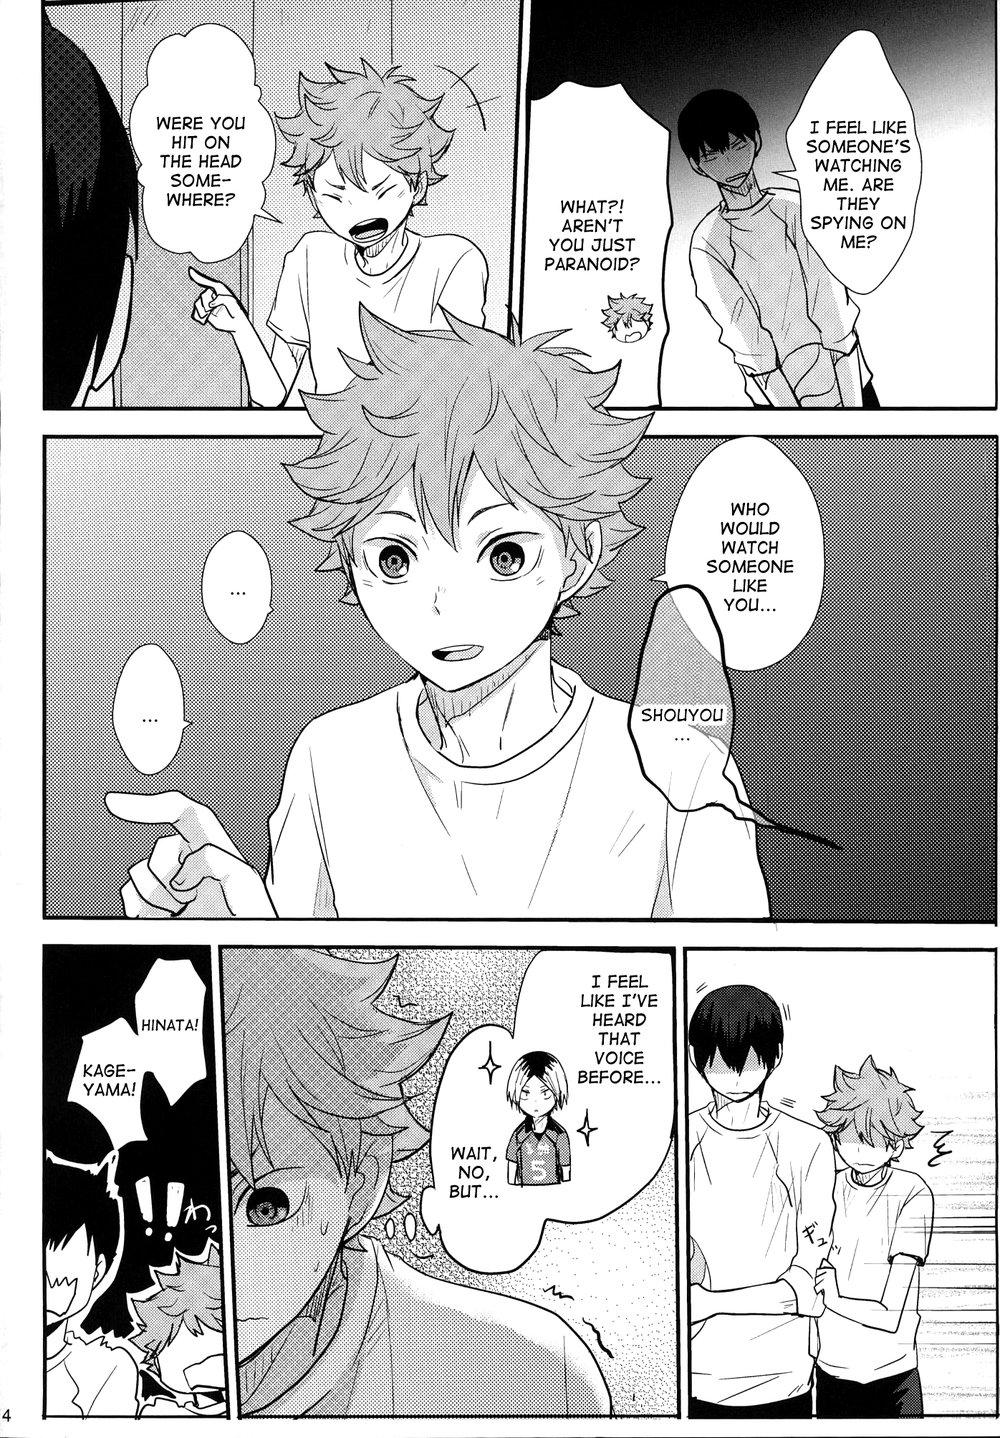 Family Taboo UNDERCOVER! - Haikyuu Solo Female - Page 3